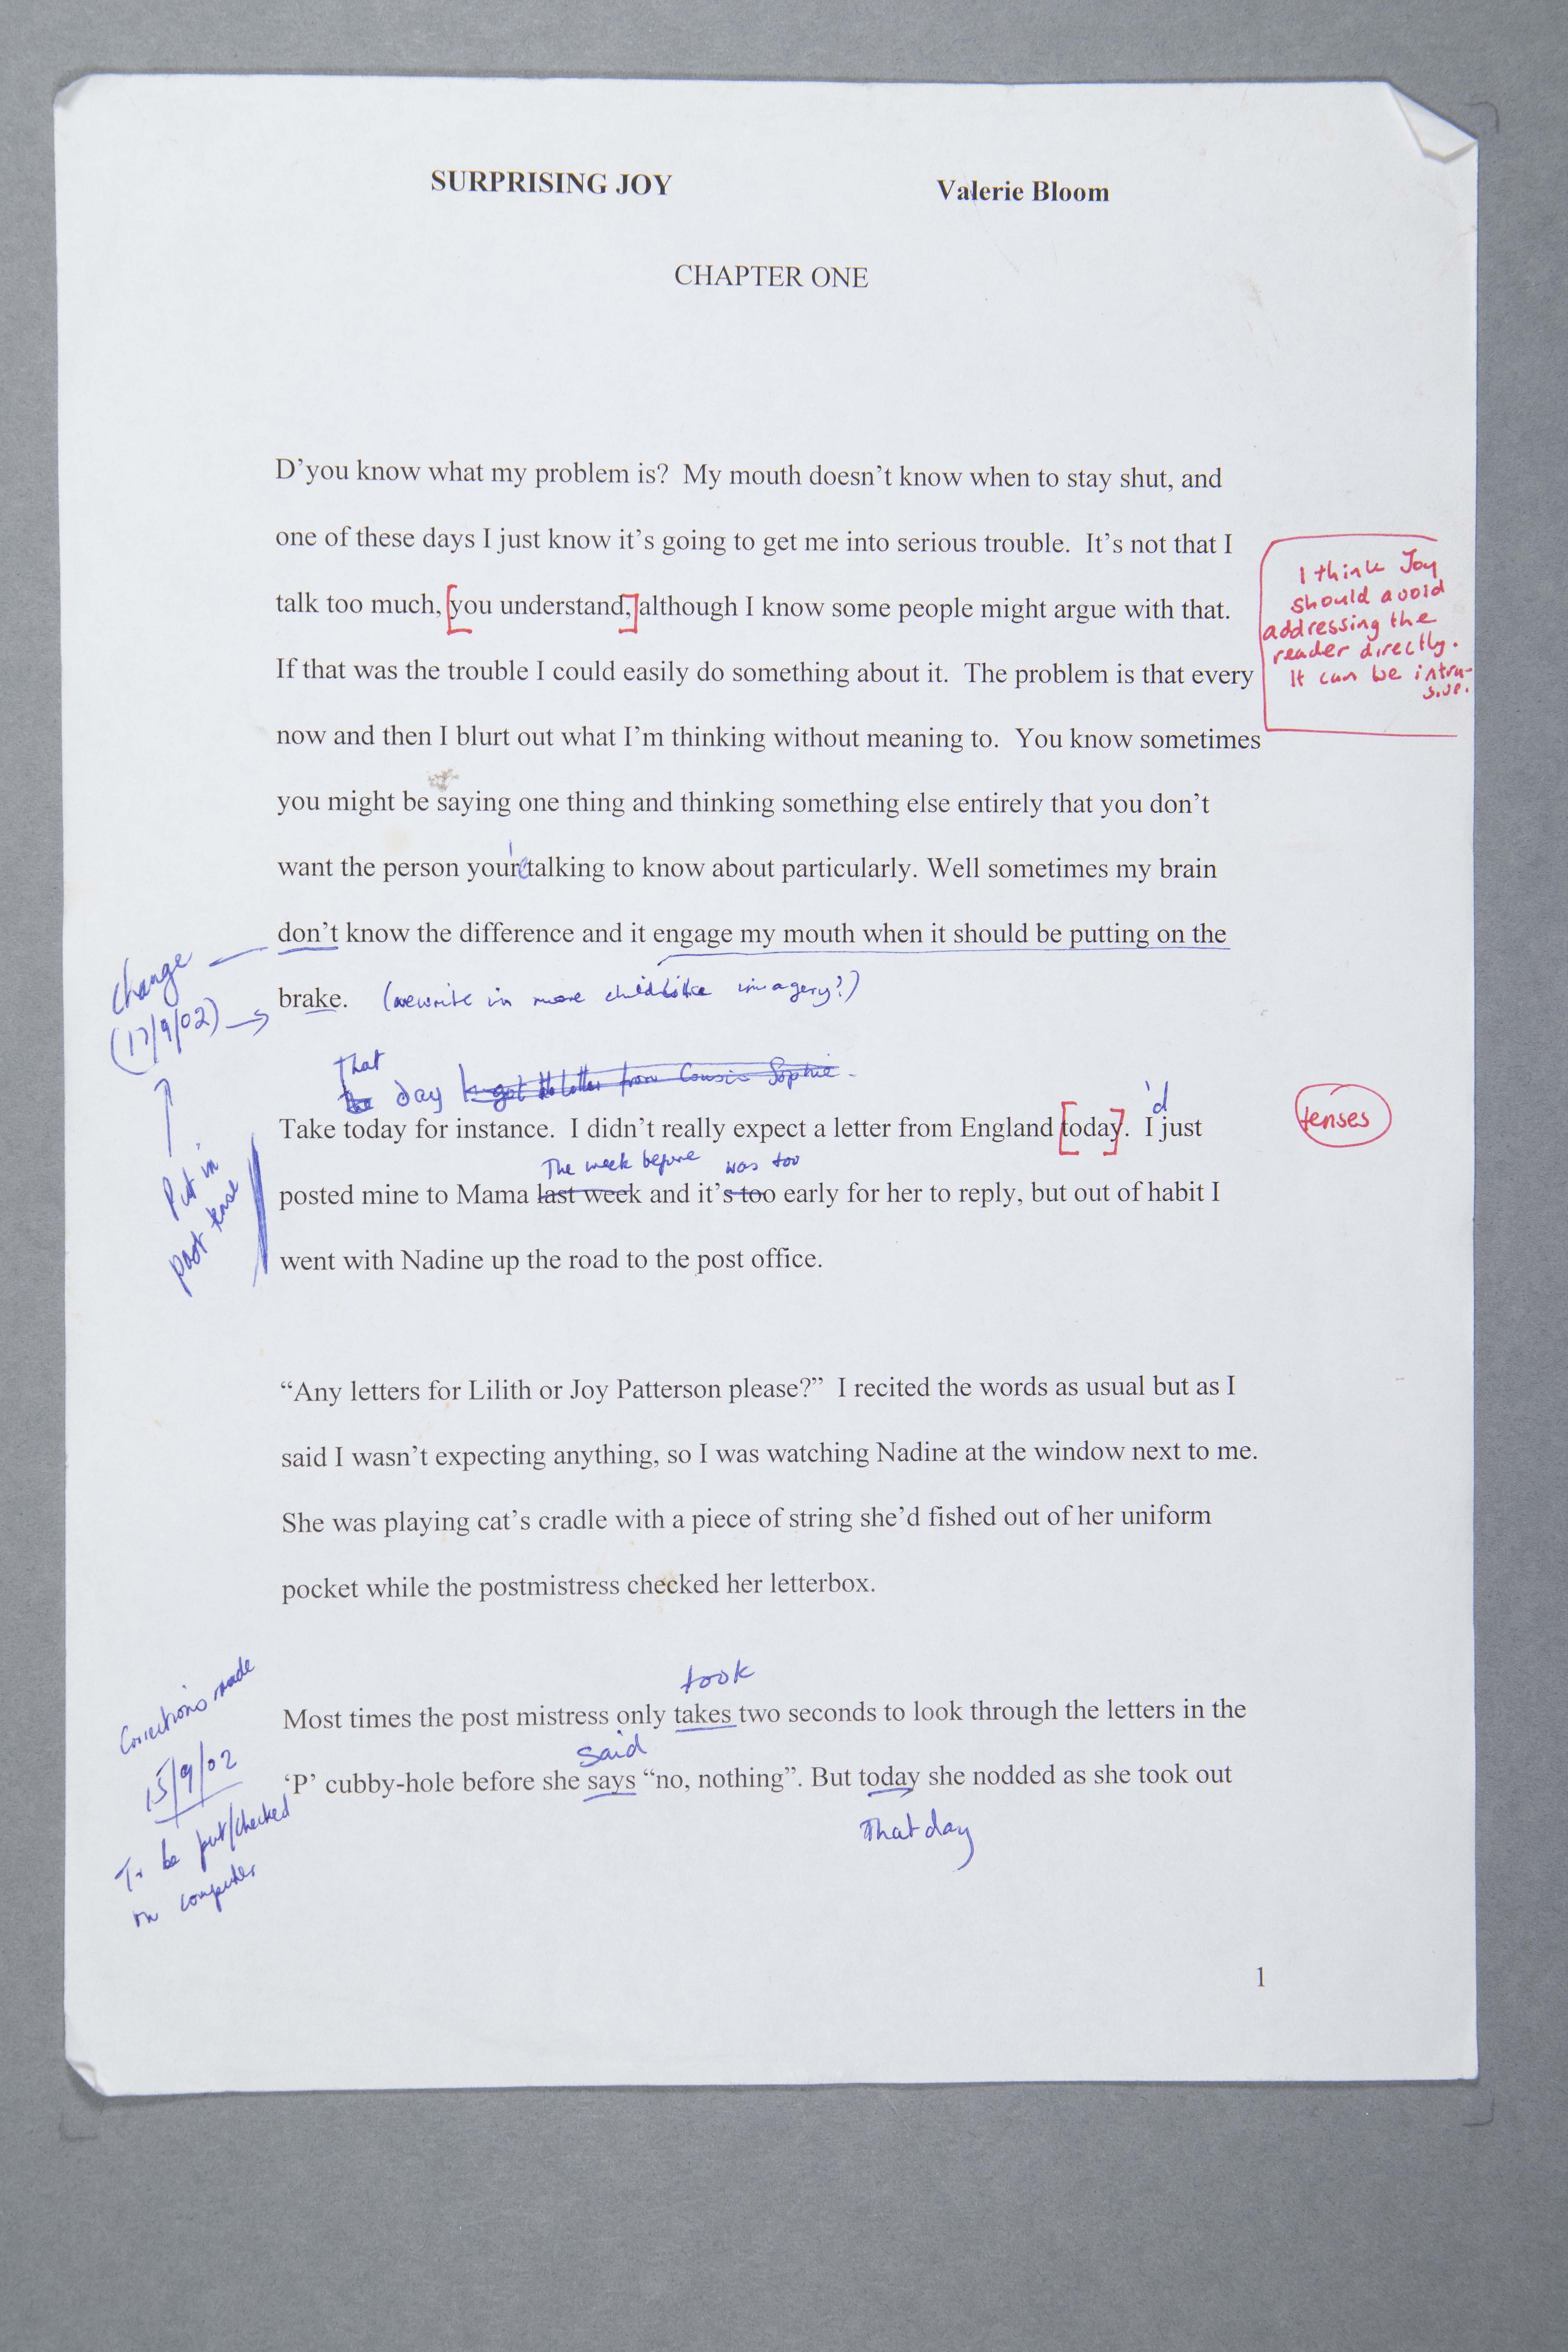 A typed draft for the novel 'Surprising Joy', including manuscript corrections, additions and deletions in blue and red ink.